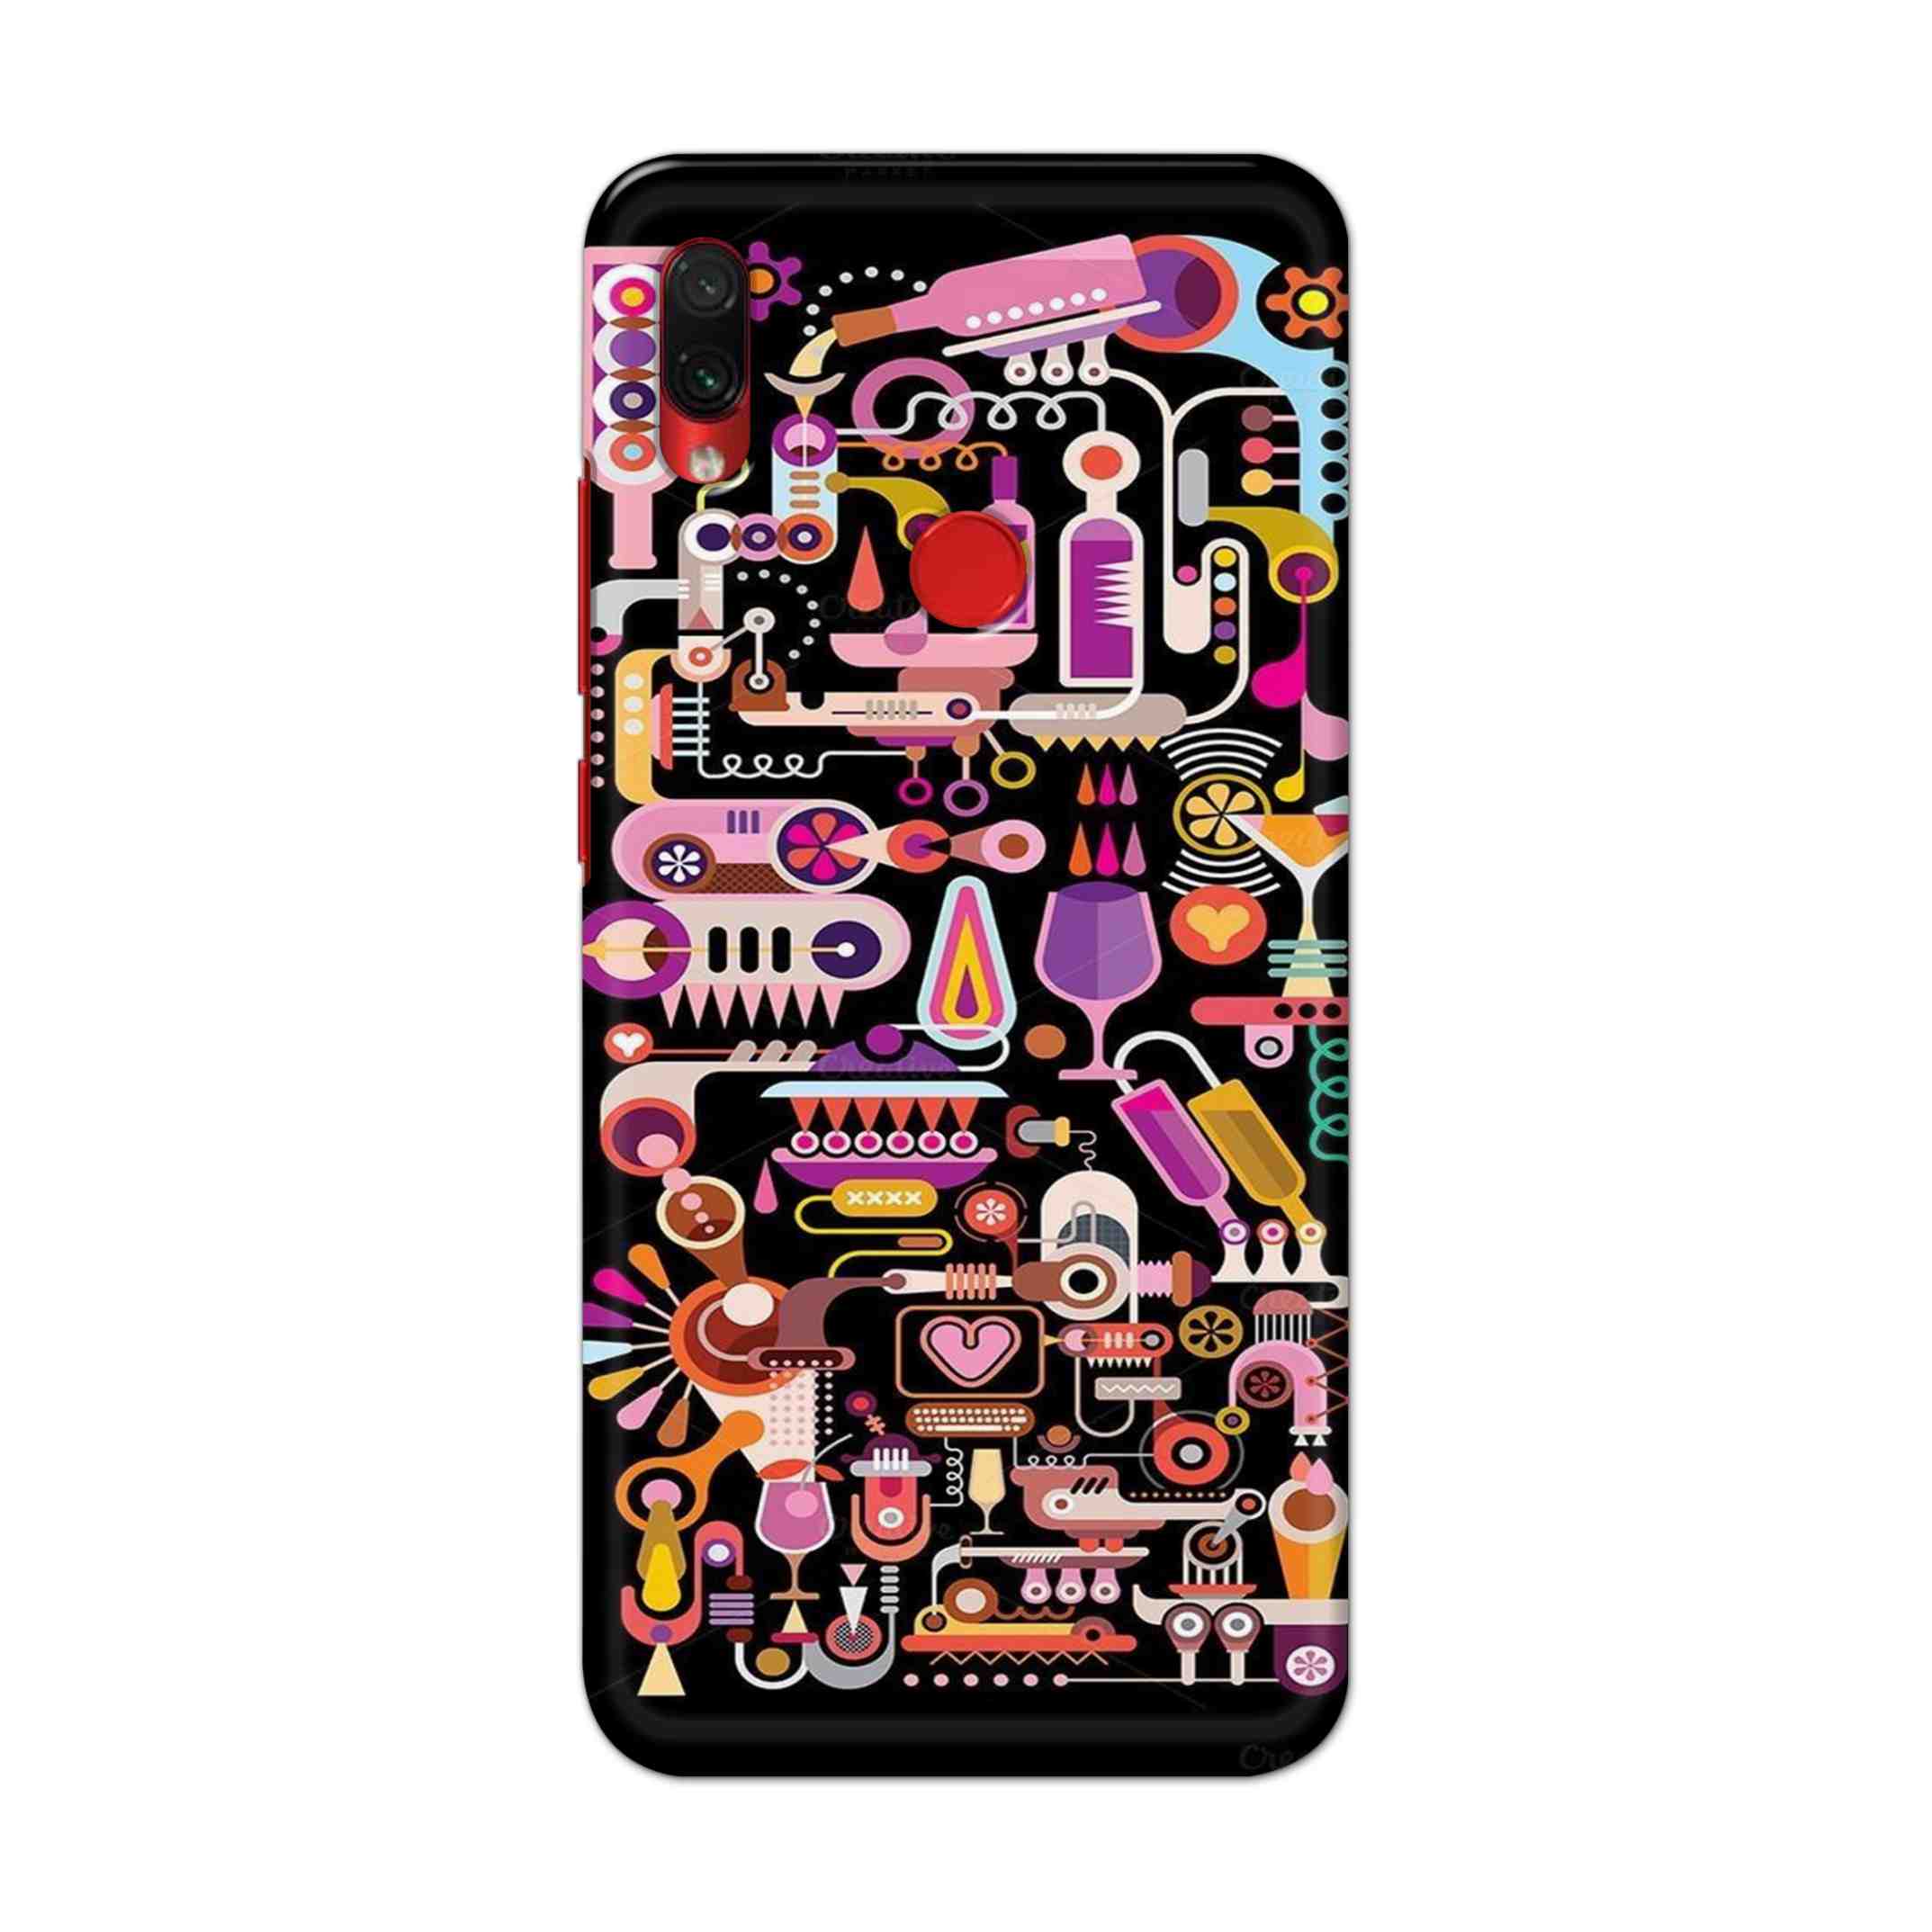 Buy Lab Art Hard Back Mobile Phone Case Cover For Xiaomi Redmi Note 7S Online